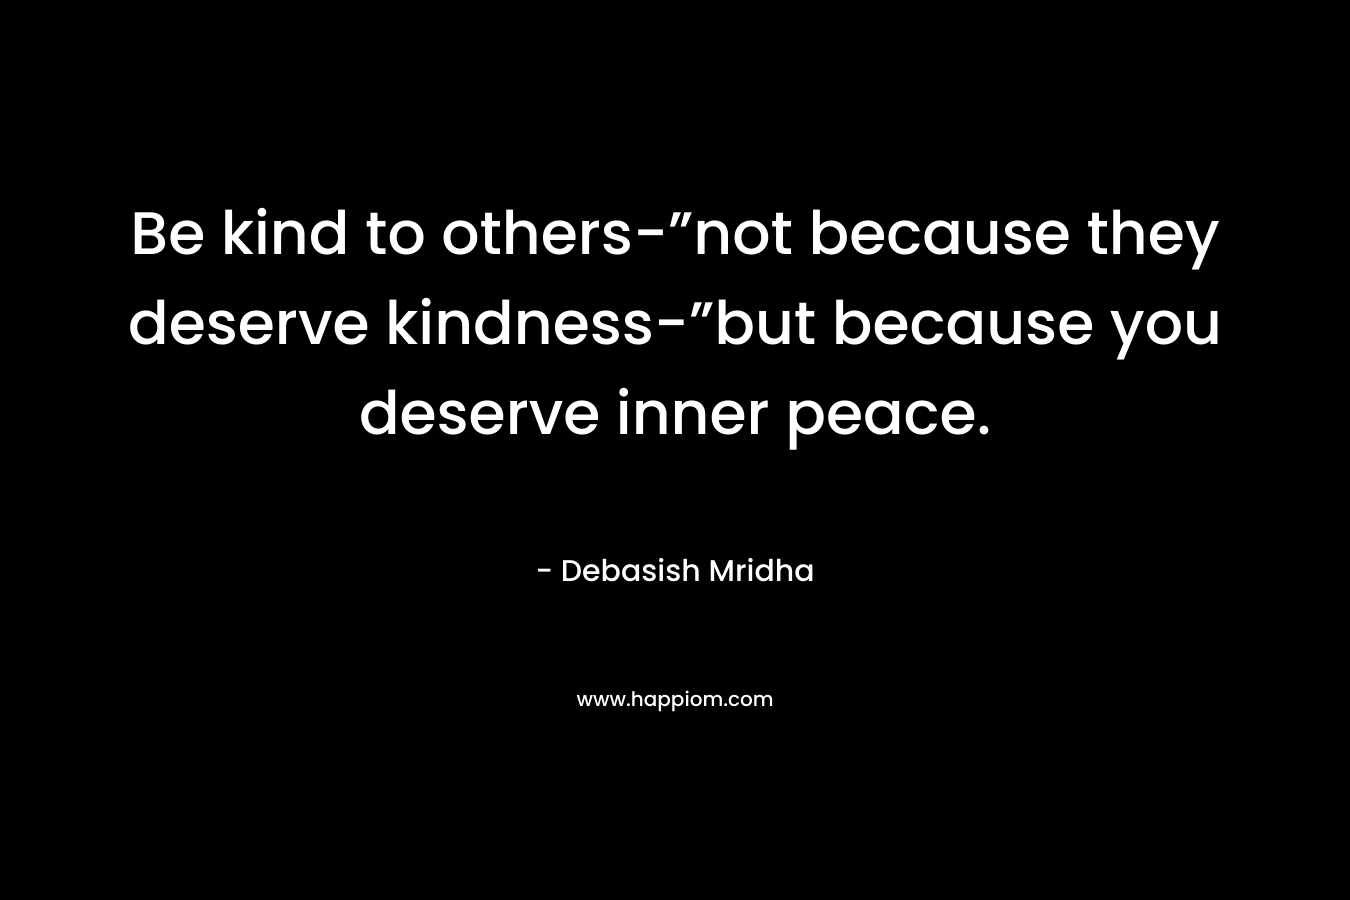 Be kind to others-”not because they deserve kindness-”but because you deserve inner peace.